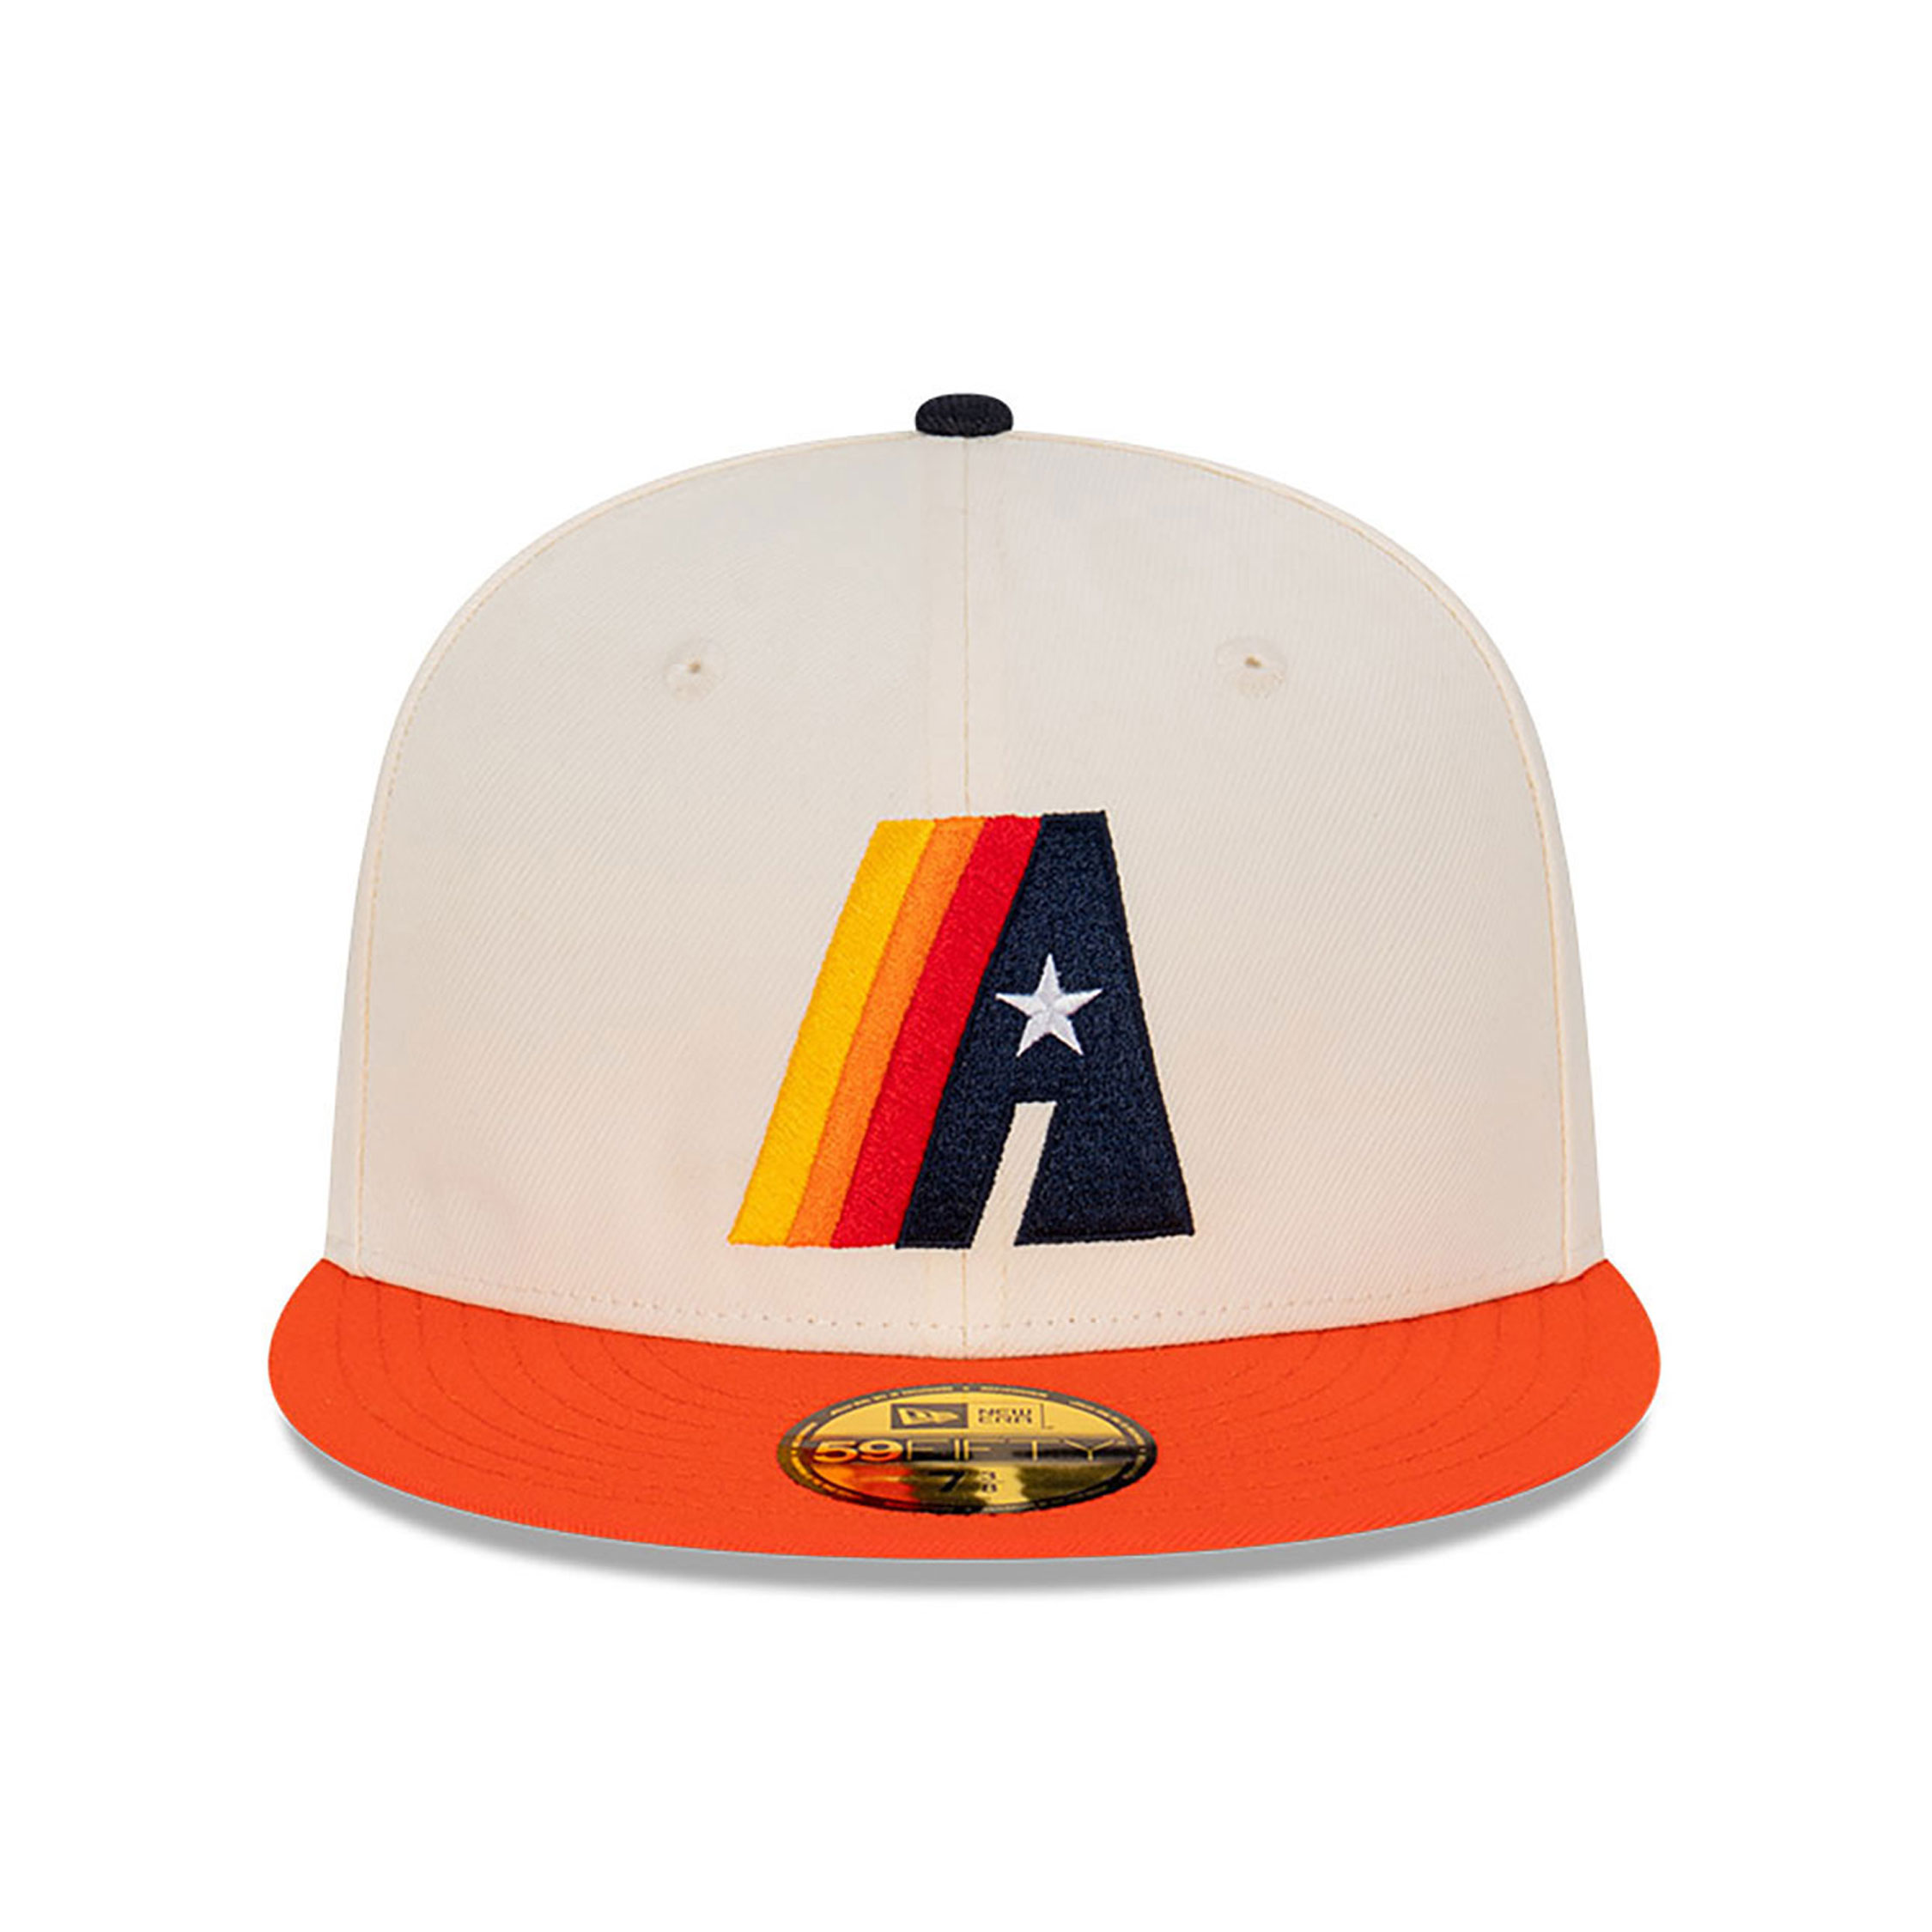 Houston Astros Cooperstown Chrome White 59FIFTY Fitted Cap